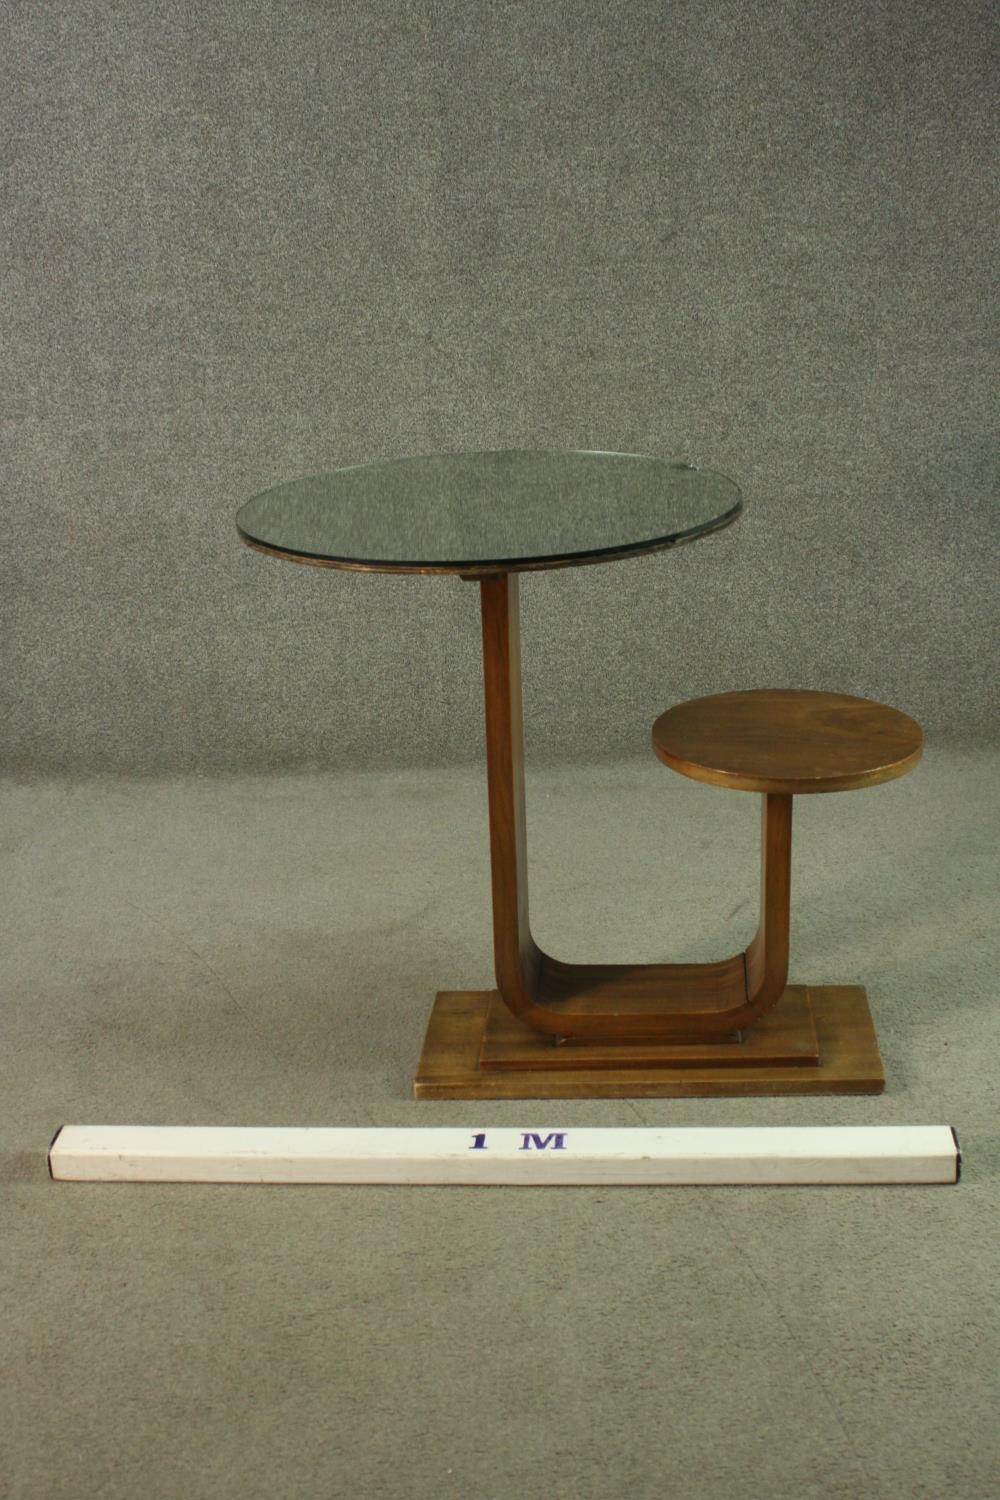 An Art Deco teak table and stool, with a circular glass table top, on a support which curves up to a - Image 2 of 8